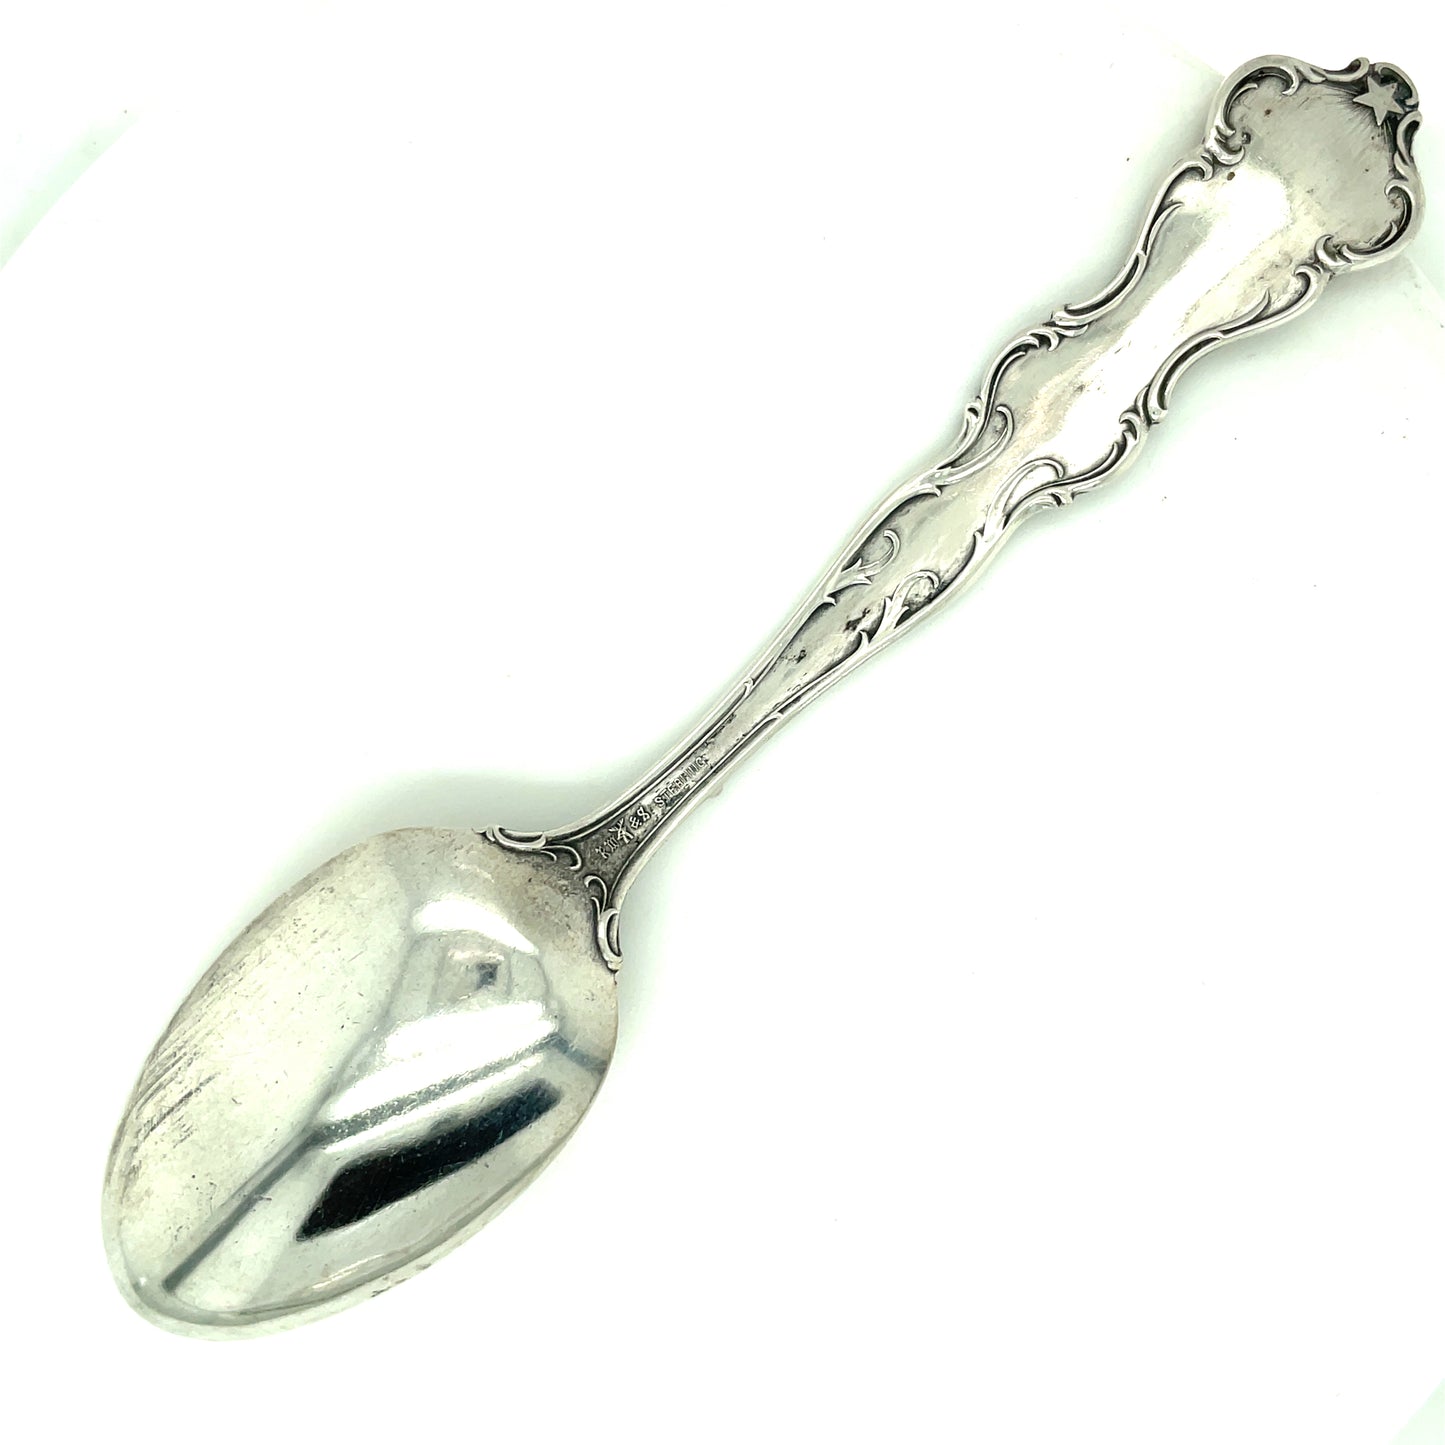 Vintage R. Wallace & Sons August Virgo Poppy Sterling Silver Spoon No Monogram